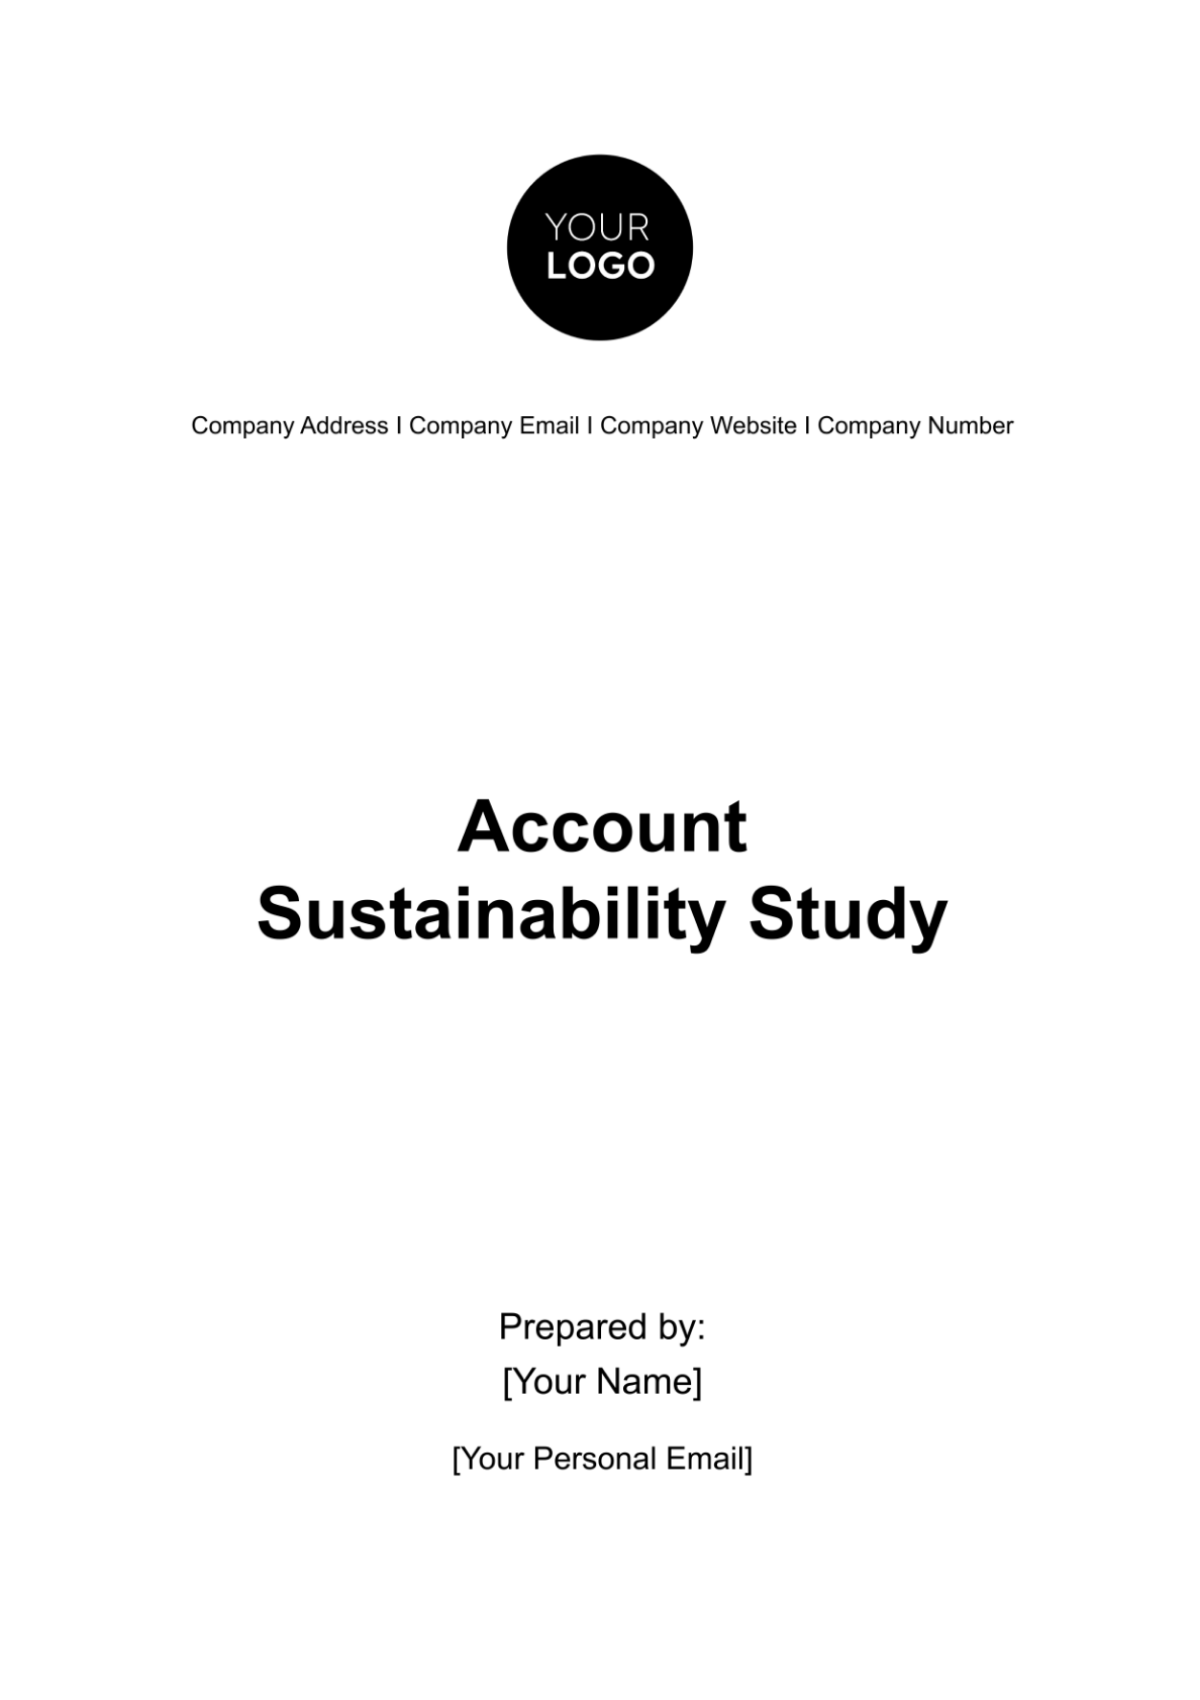 Account Sustainability Study Template